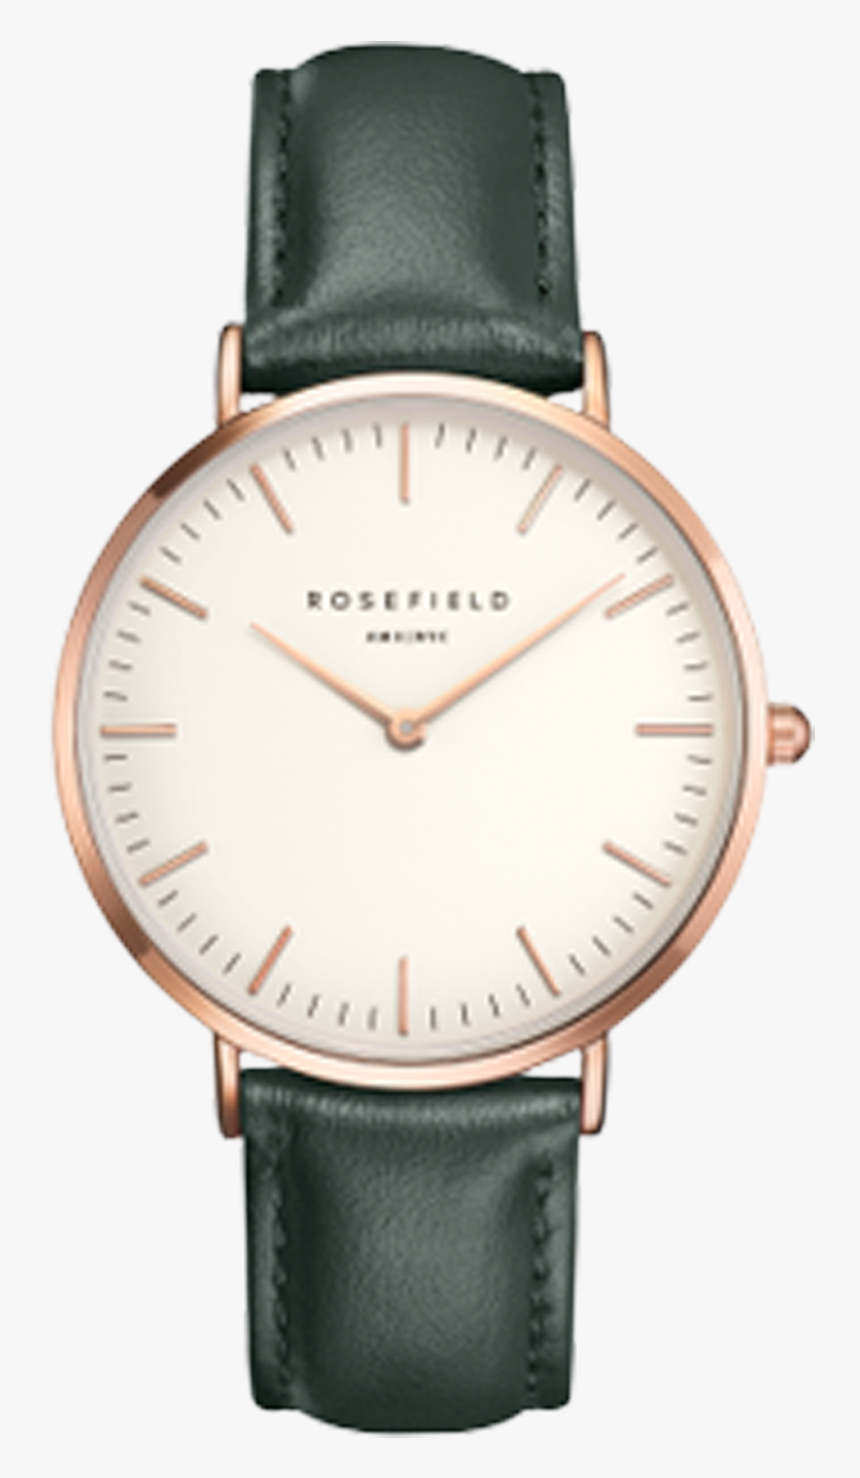 Simple Analog Watches For Men, HD Png Download, Free Download